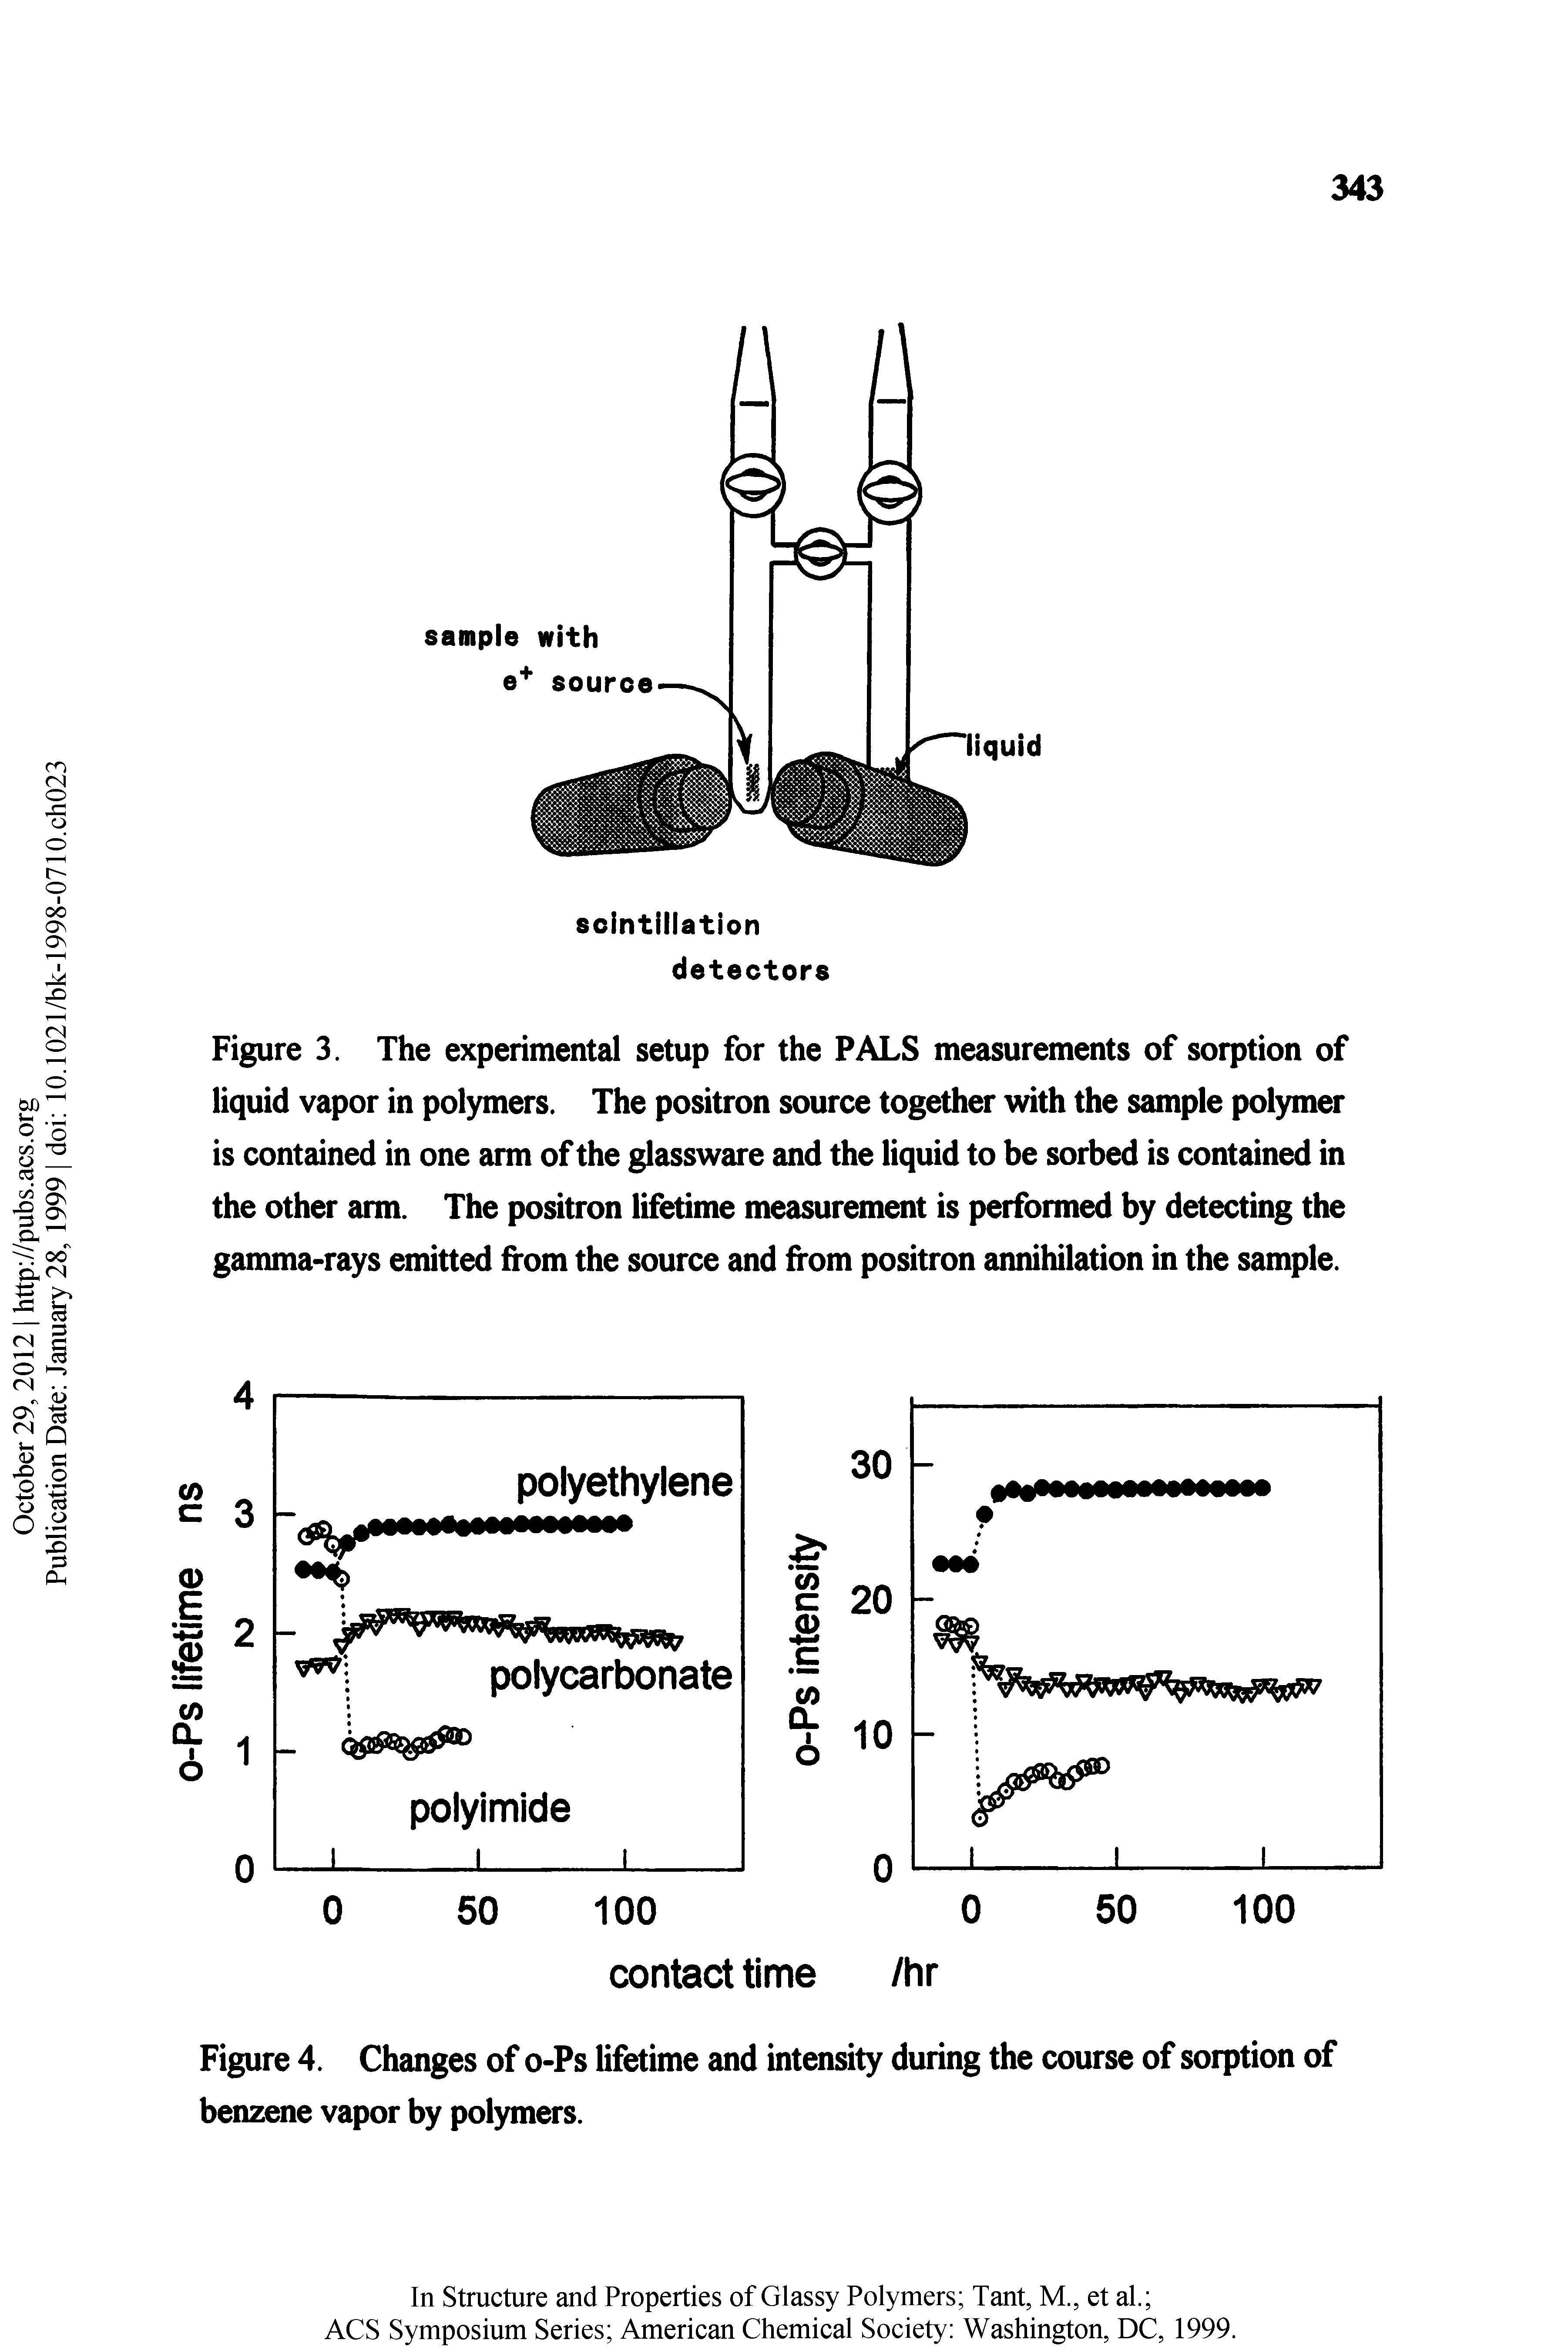 Figure 3. The experimental setup for the PALS measurements of sorption of liquid vapor in polymers. The positron source together with the sample polymer is contained in one arm of the glassware and the liquid to be sorbed is contained in the other arm. The positron lifetime measurement is performed by detecting the gamma-rays emitted from the source and from positron annihilation in the sample.